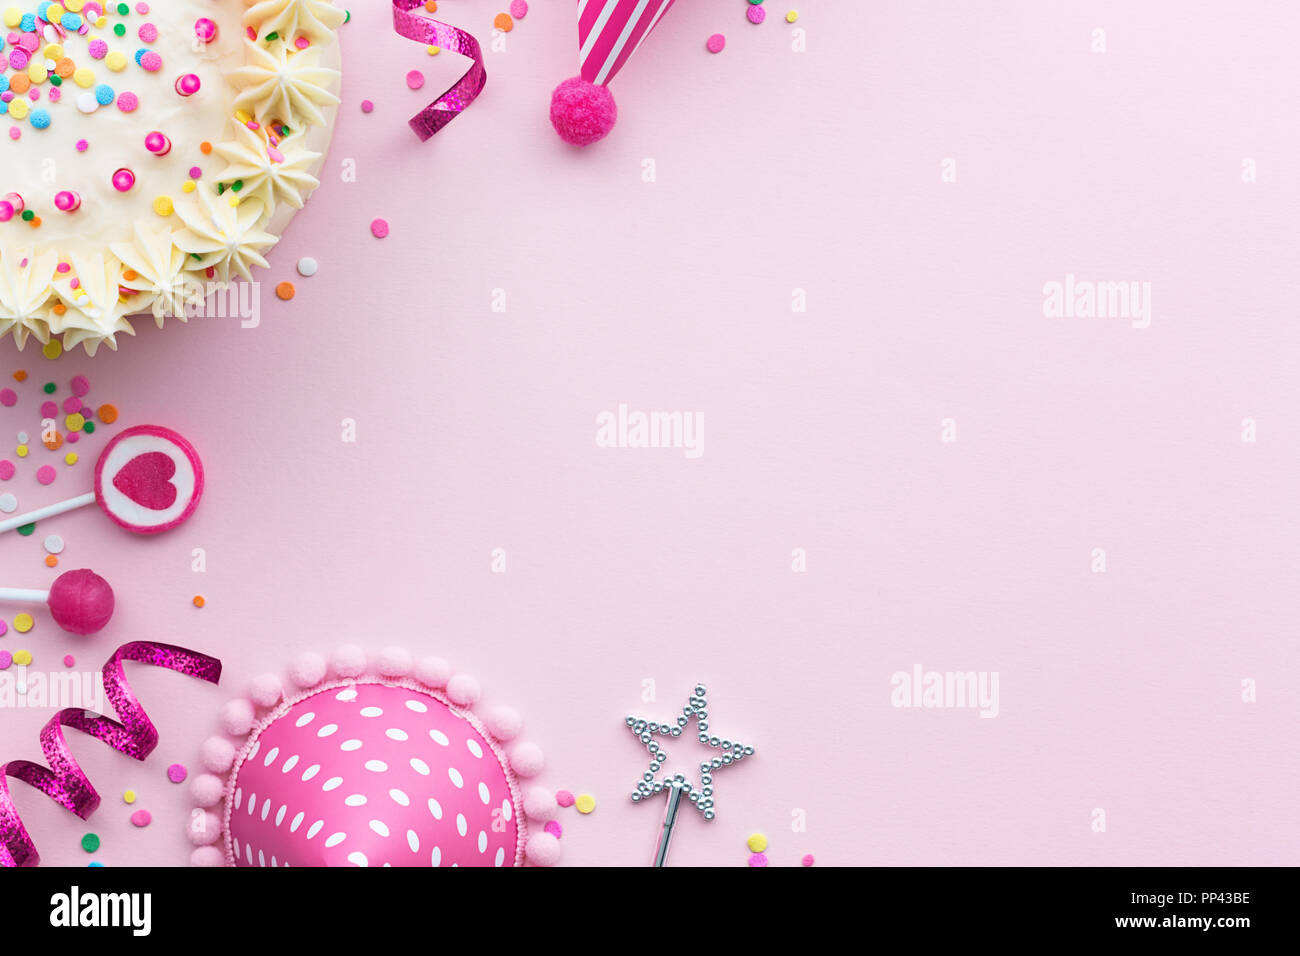 Pink birthday party background with birthday cake and party hats Stock Photo